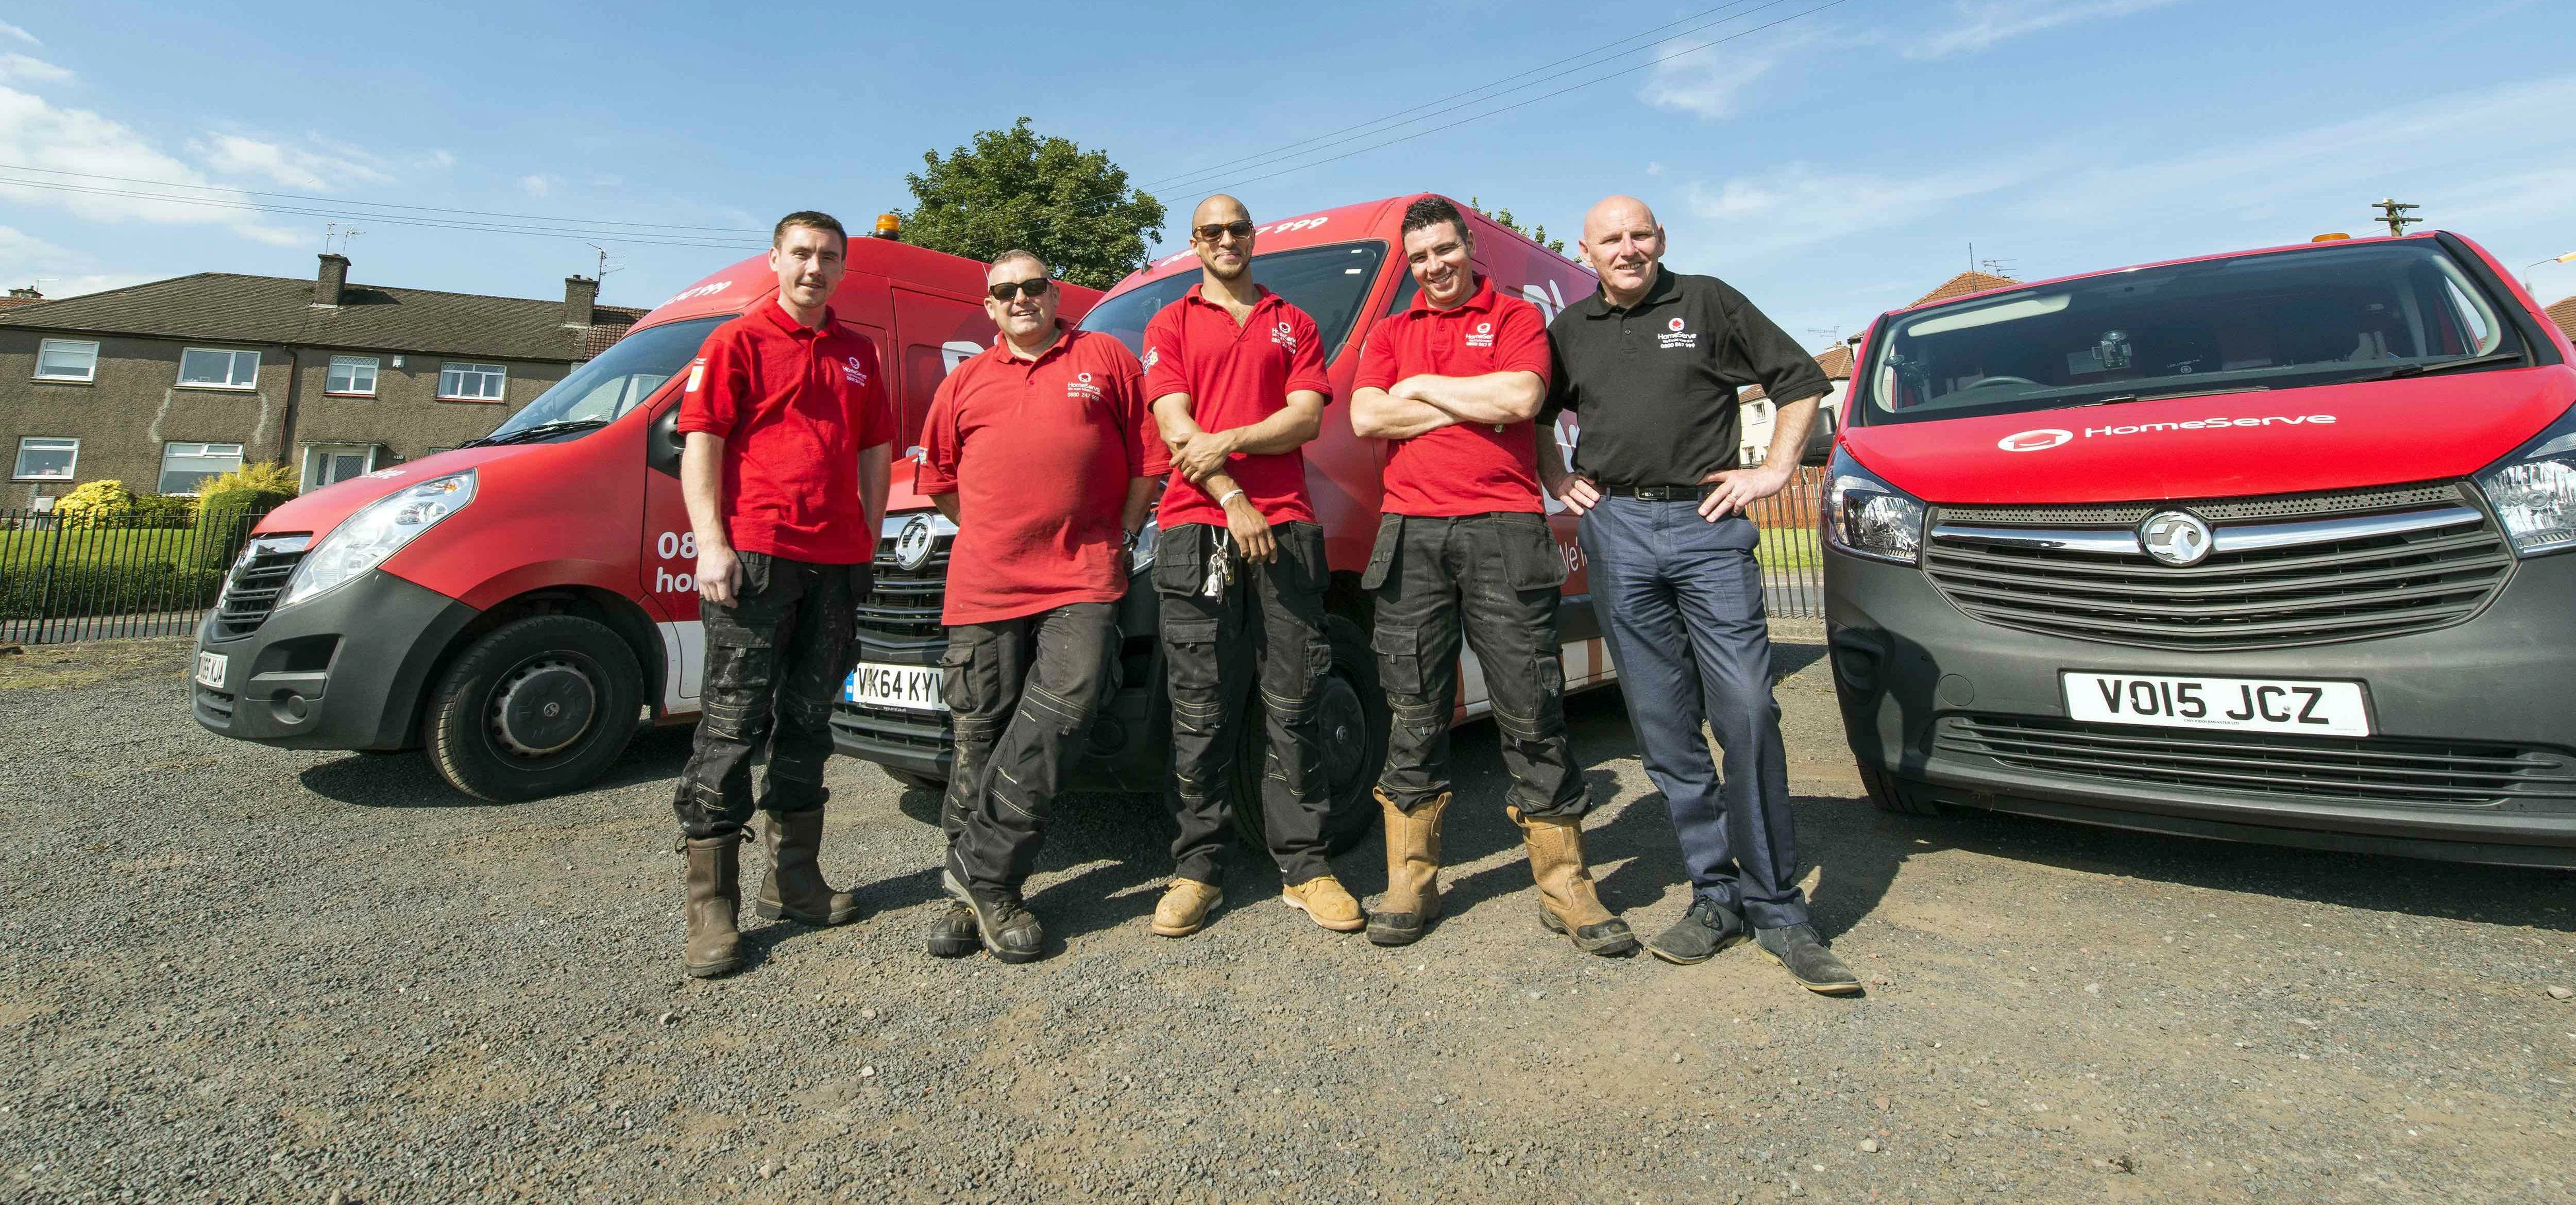 HomeServe’s team of Scottish engineers on standby to support local community projects in Edinburgh a